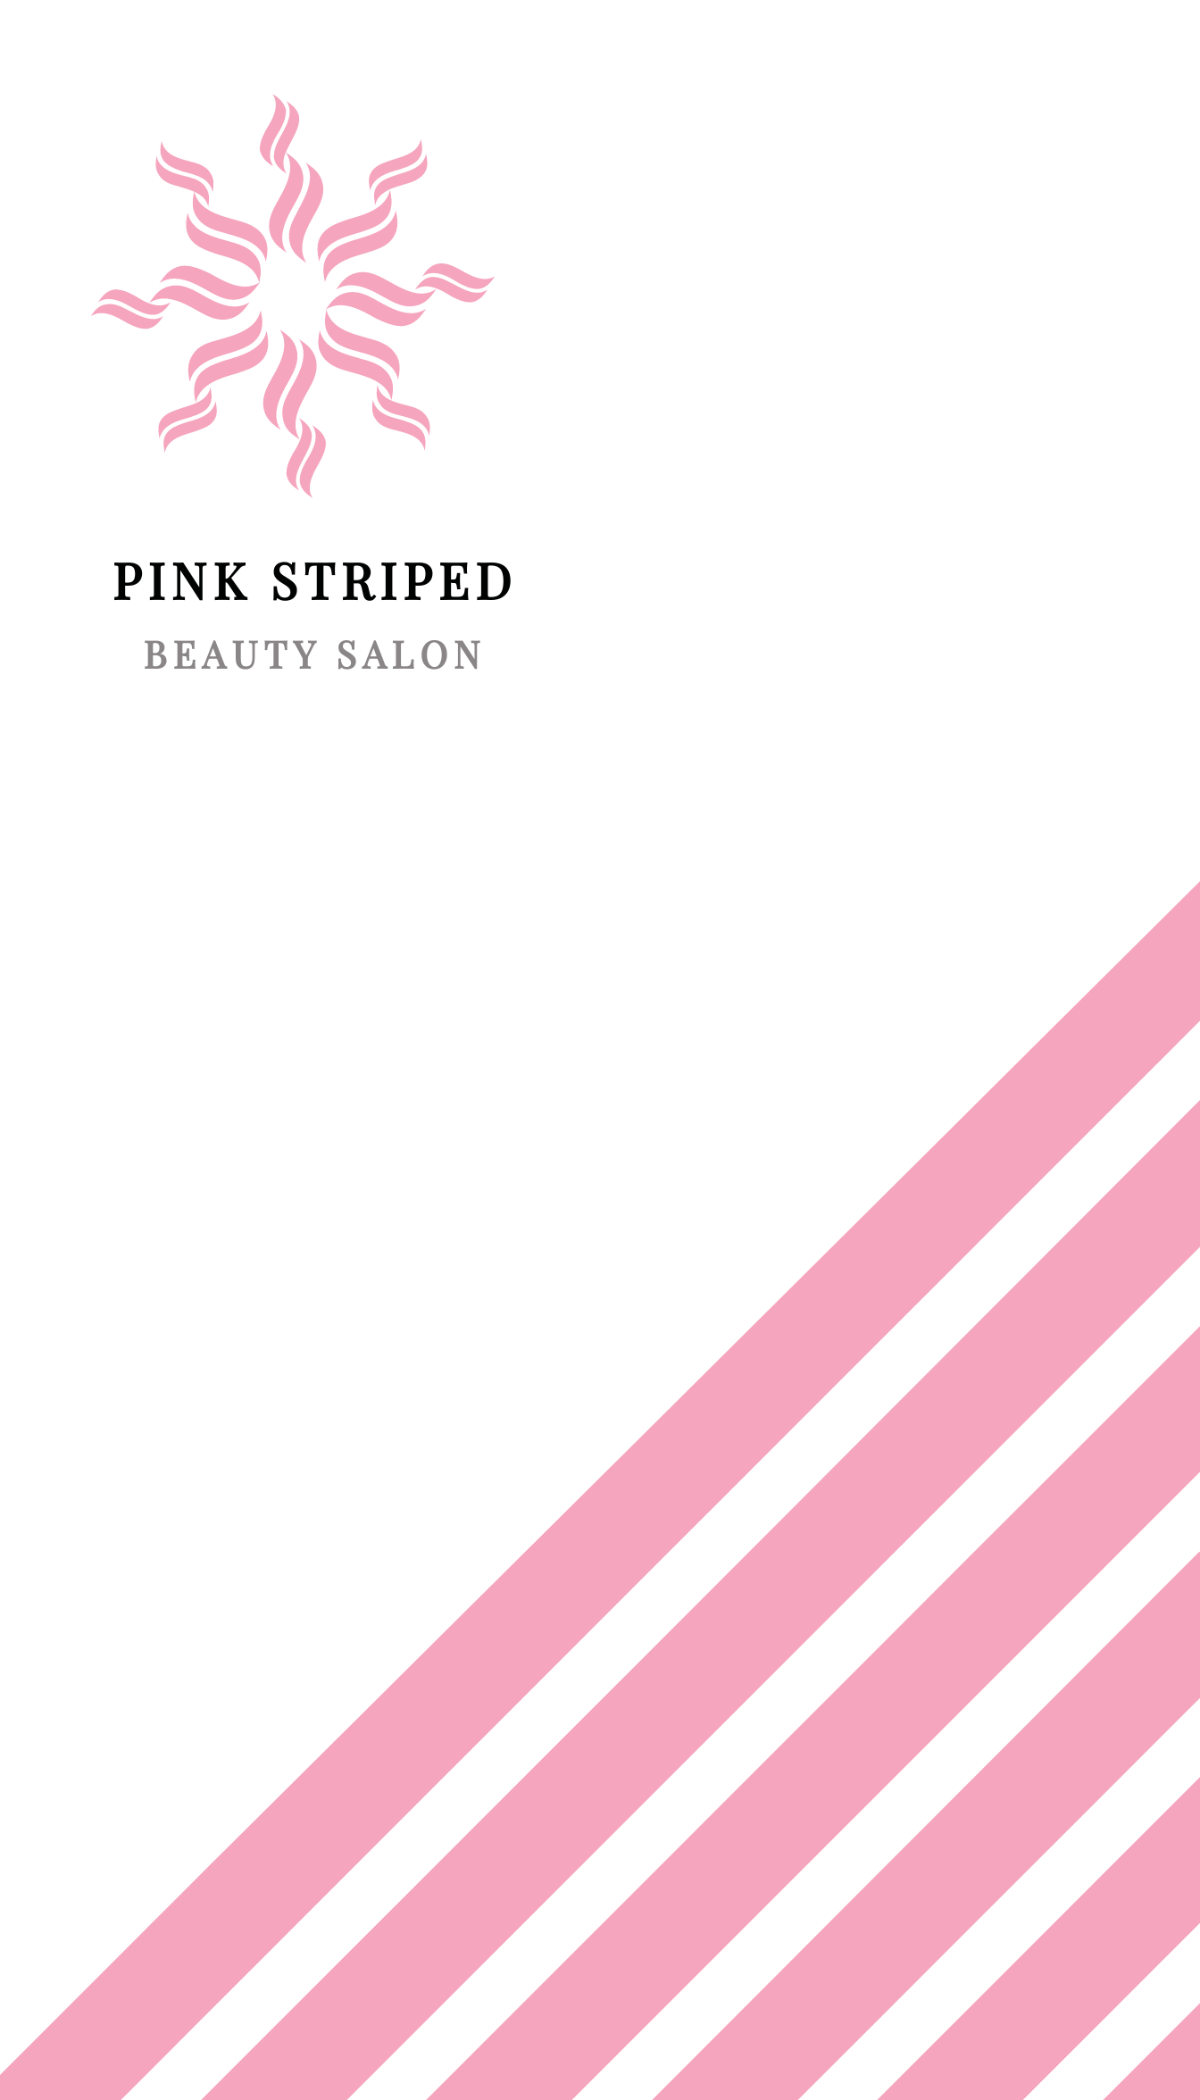 Pink Striped Business Card Template